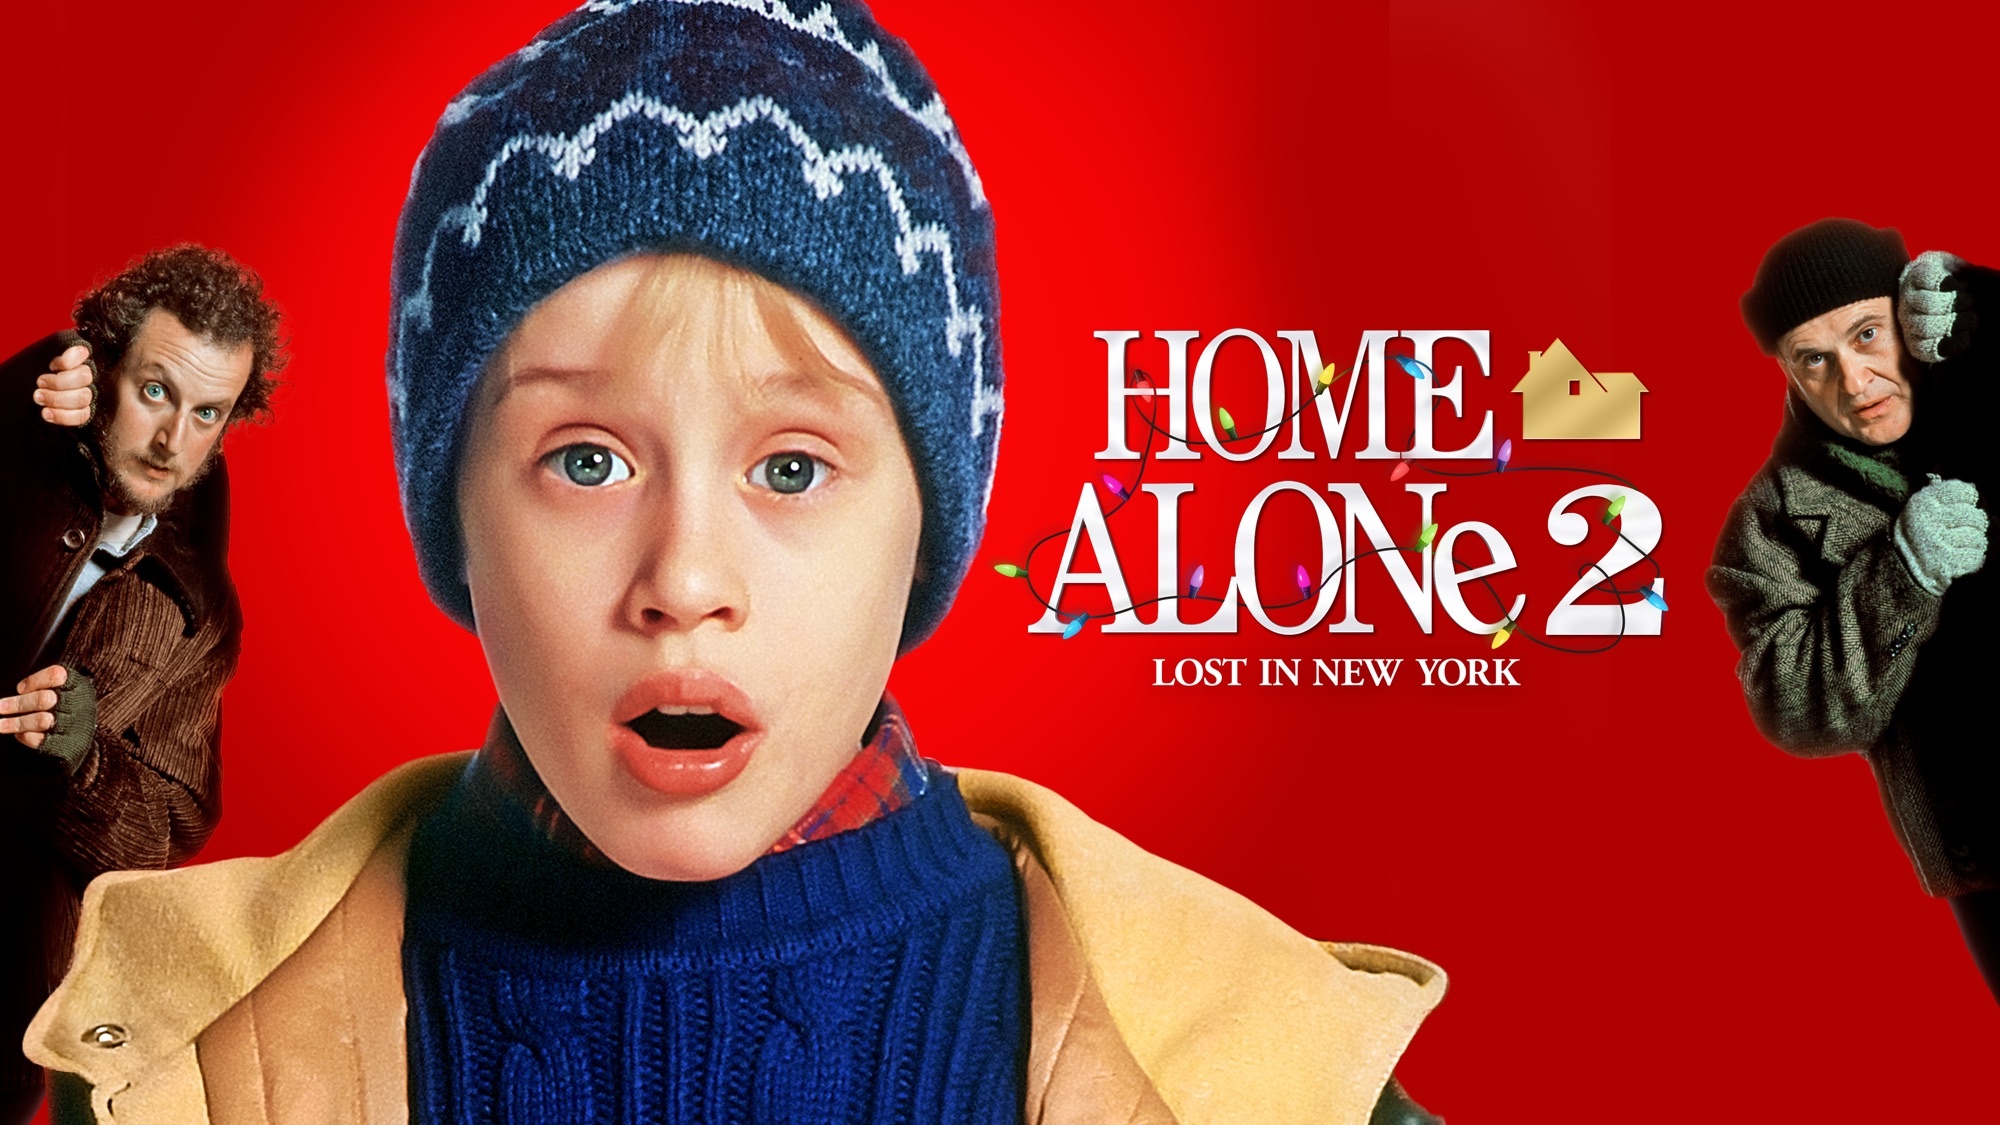 Home Alone 2, Lost in New York, wallpapers, 2000x1130 HD Desktop